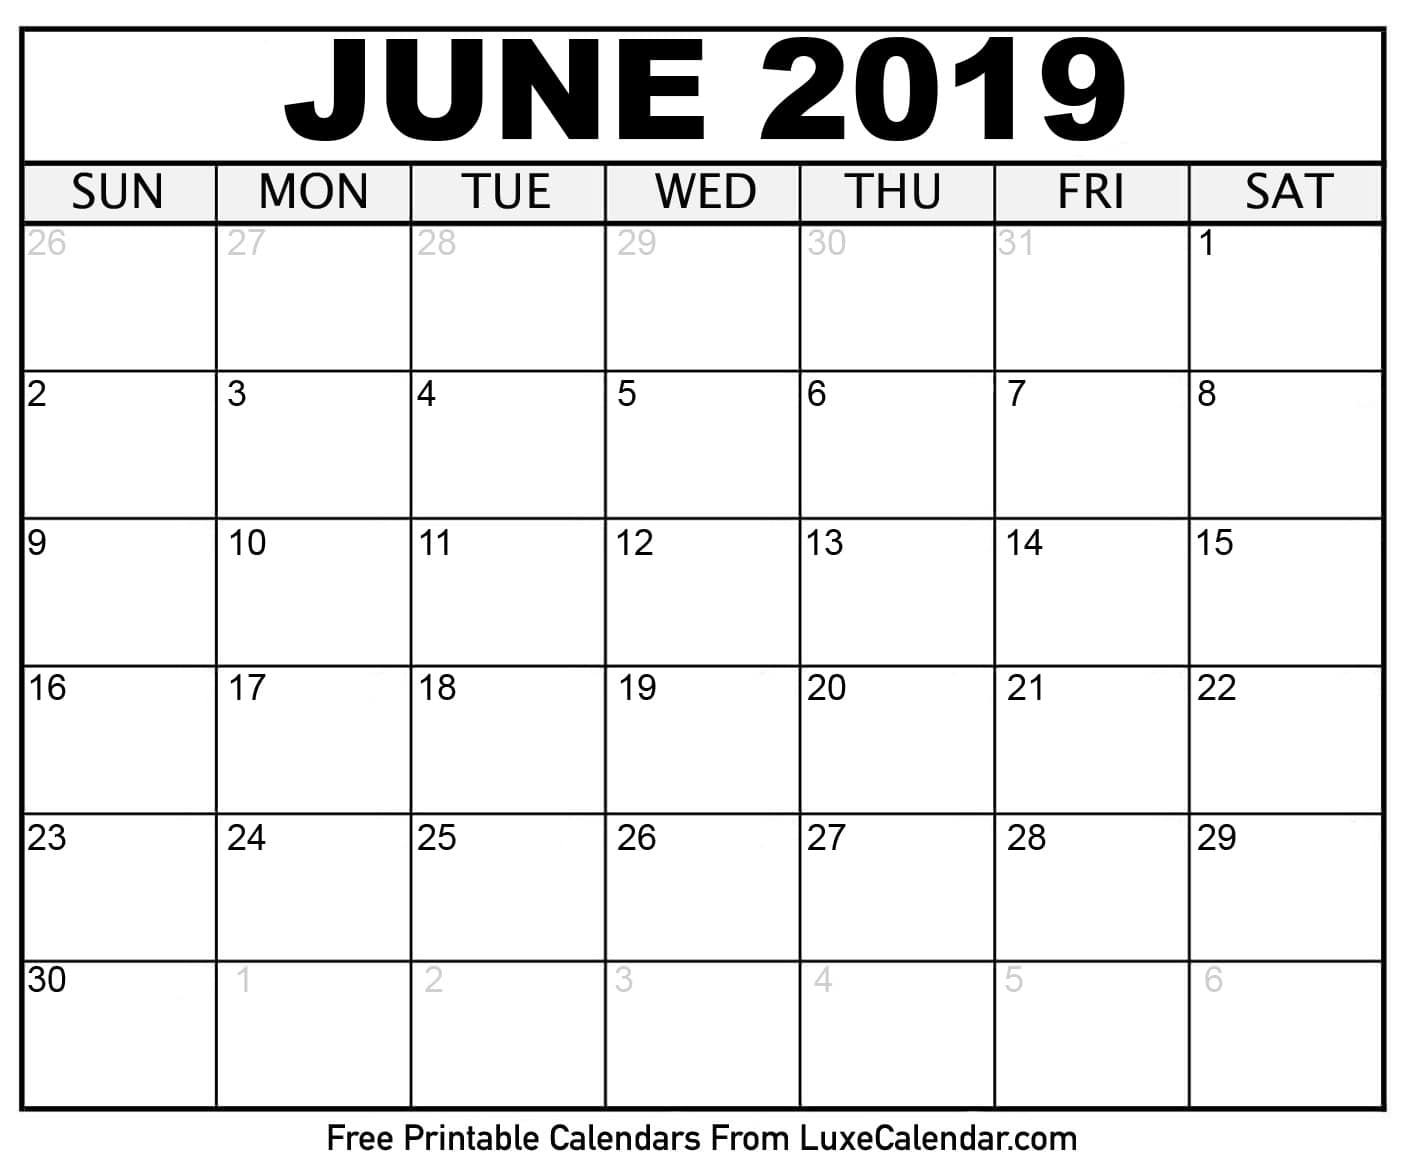 35 Format Daily Calendar Template July 2019 Layouts with Daily Calendar Template July 2019